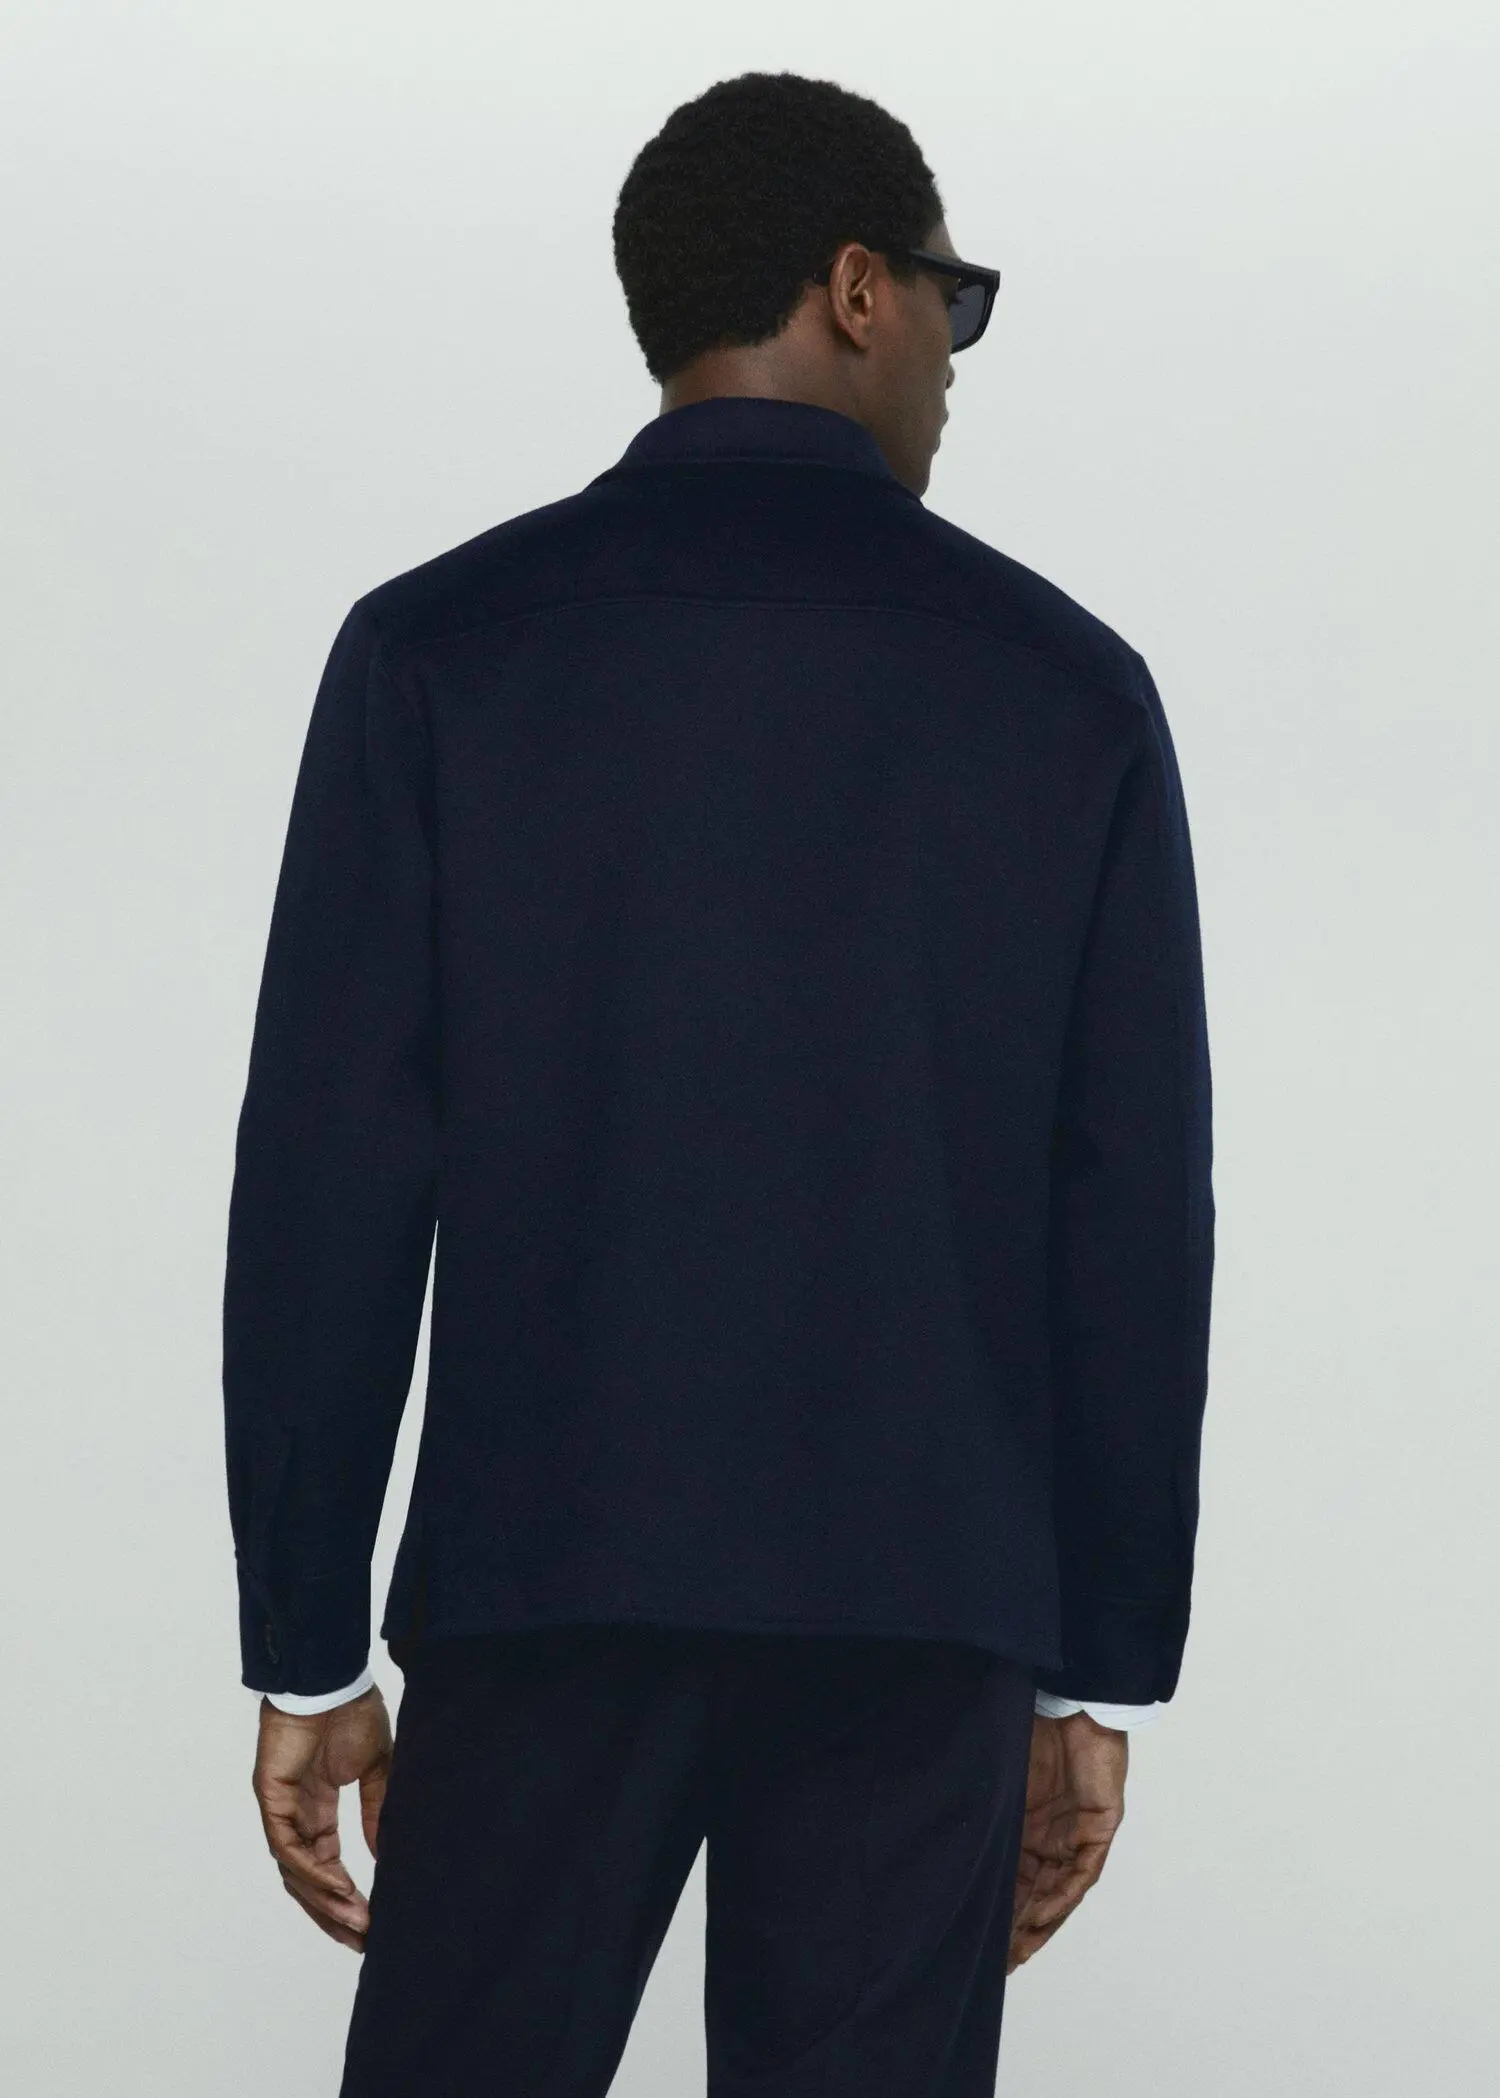 Mango Recycled wool double-face overshirt. 3